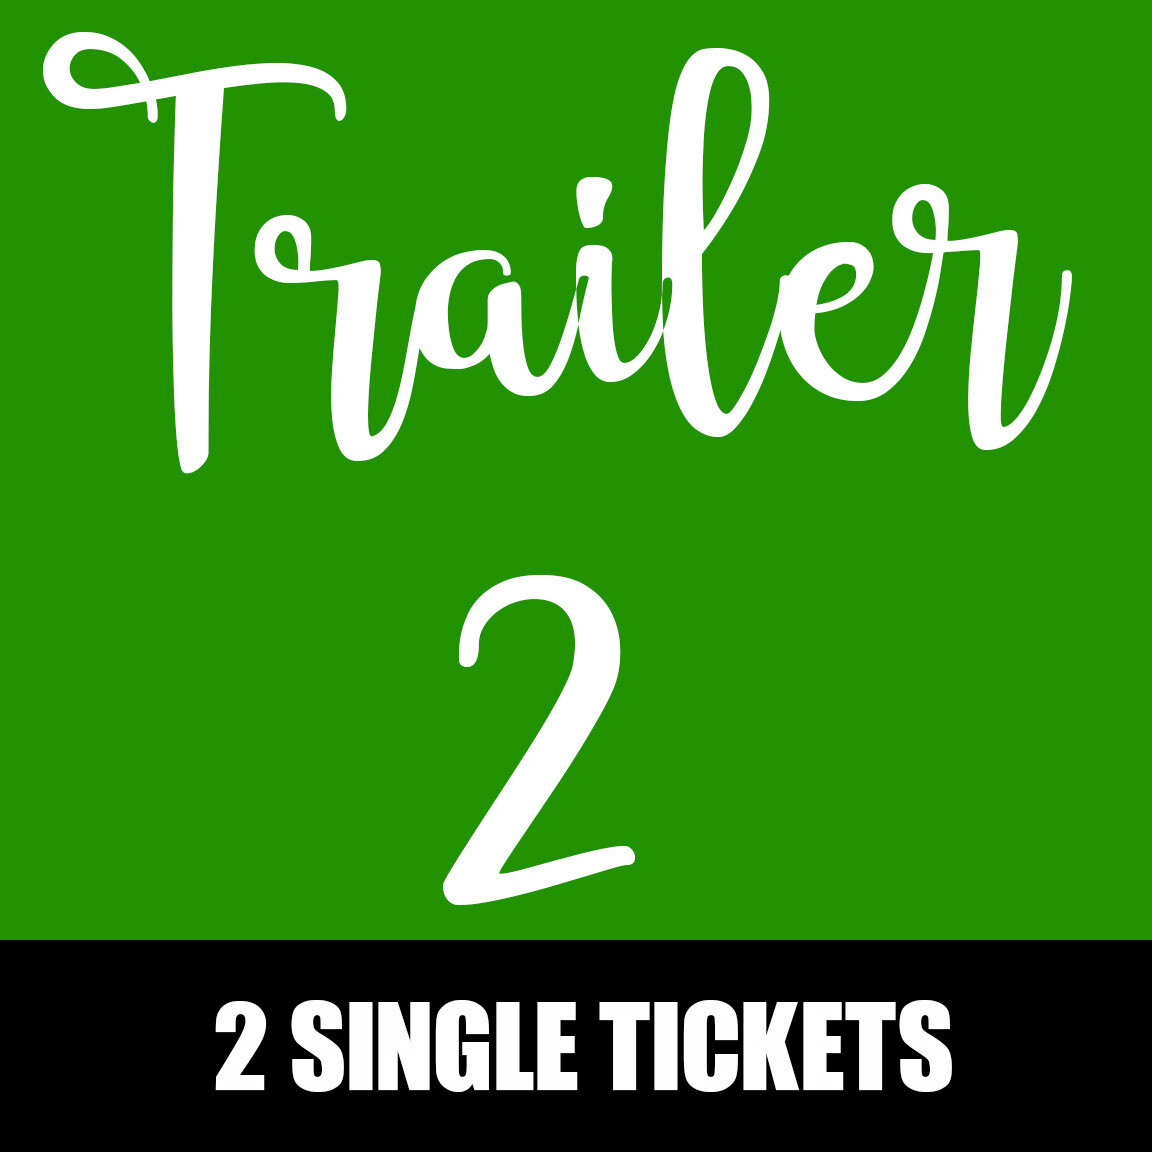 Trailer 2 - December 16th @ 9pm - Two Single Tickets